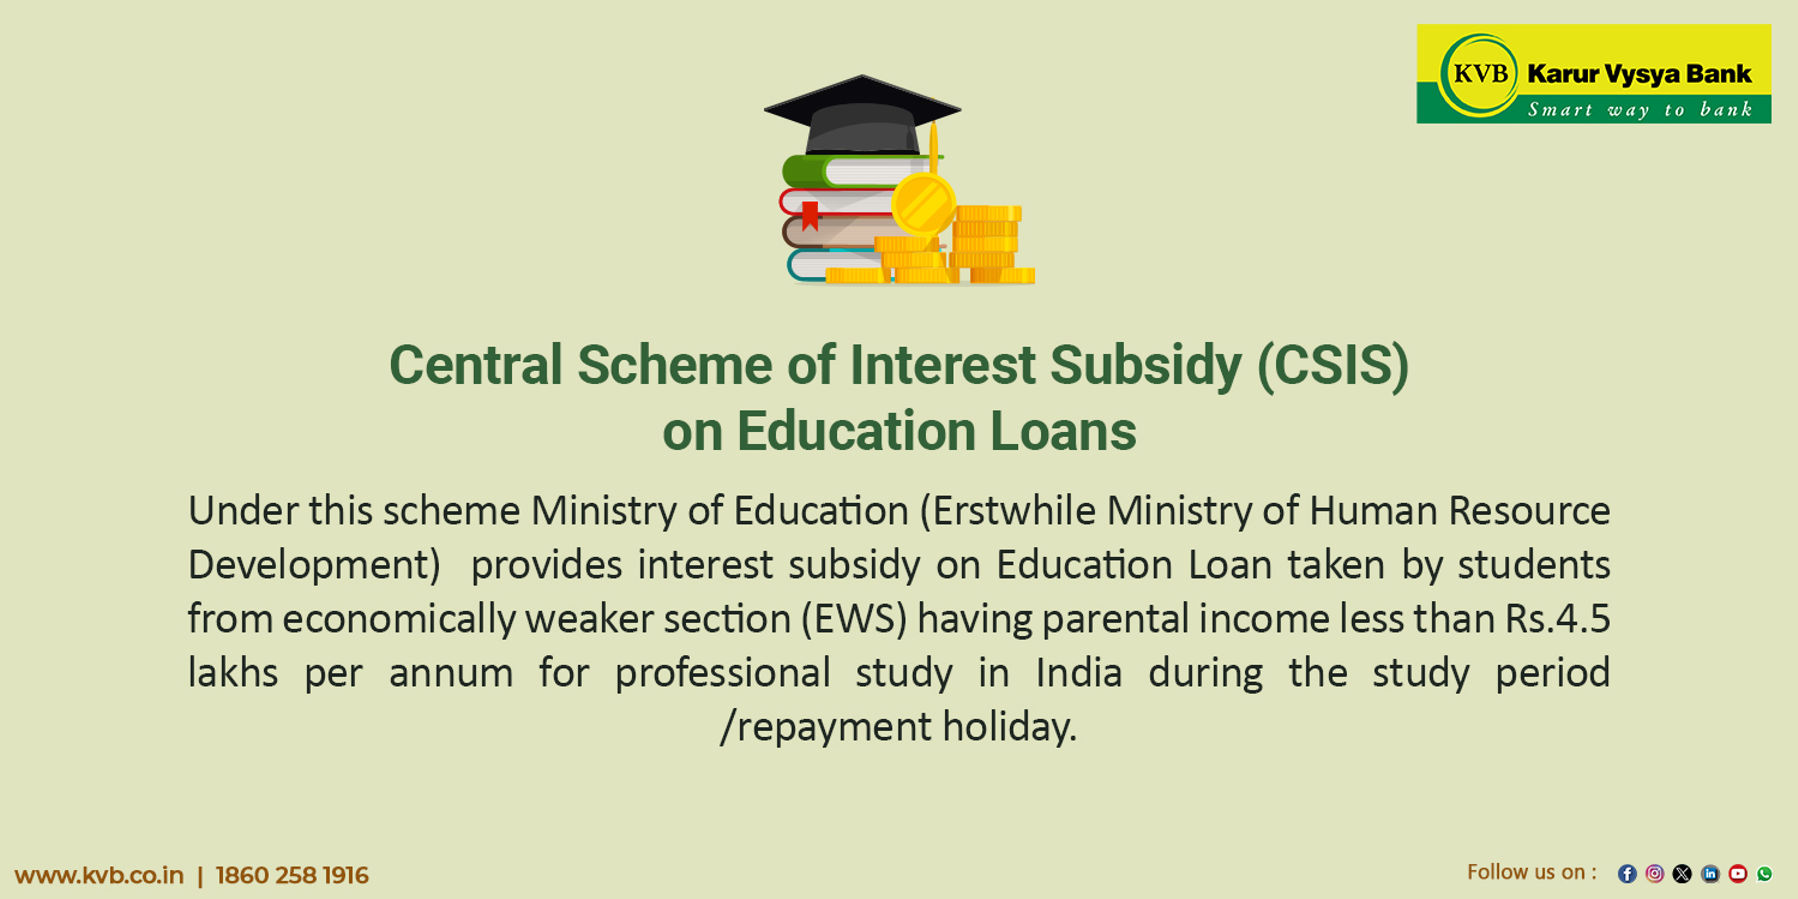 Central Scheme of Interest Subsidy(CSIS) on Education Loans